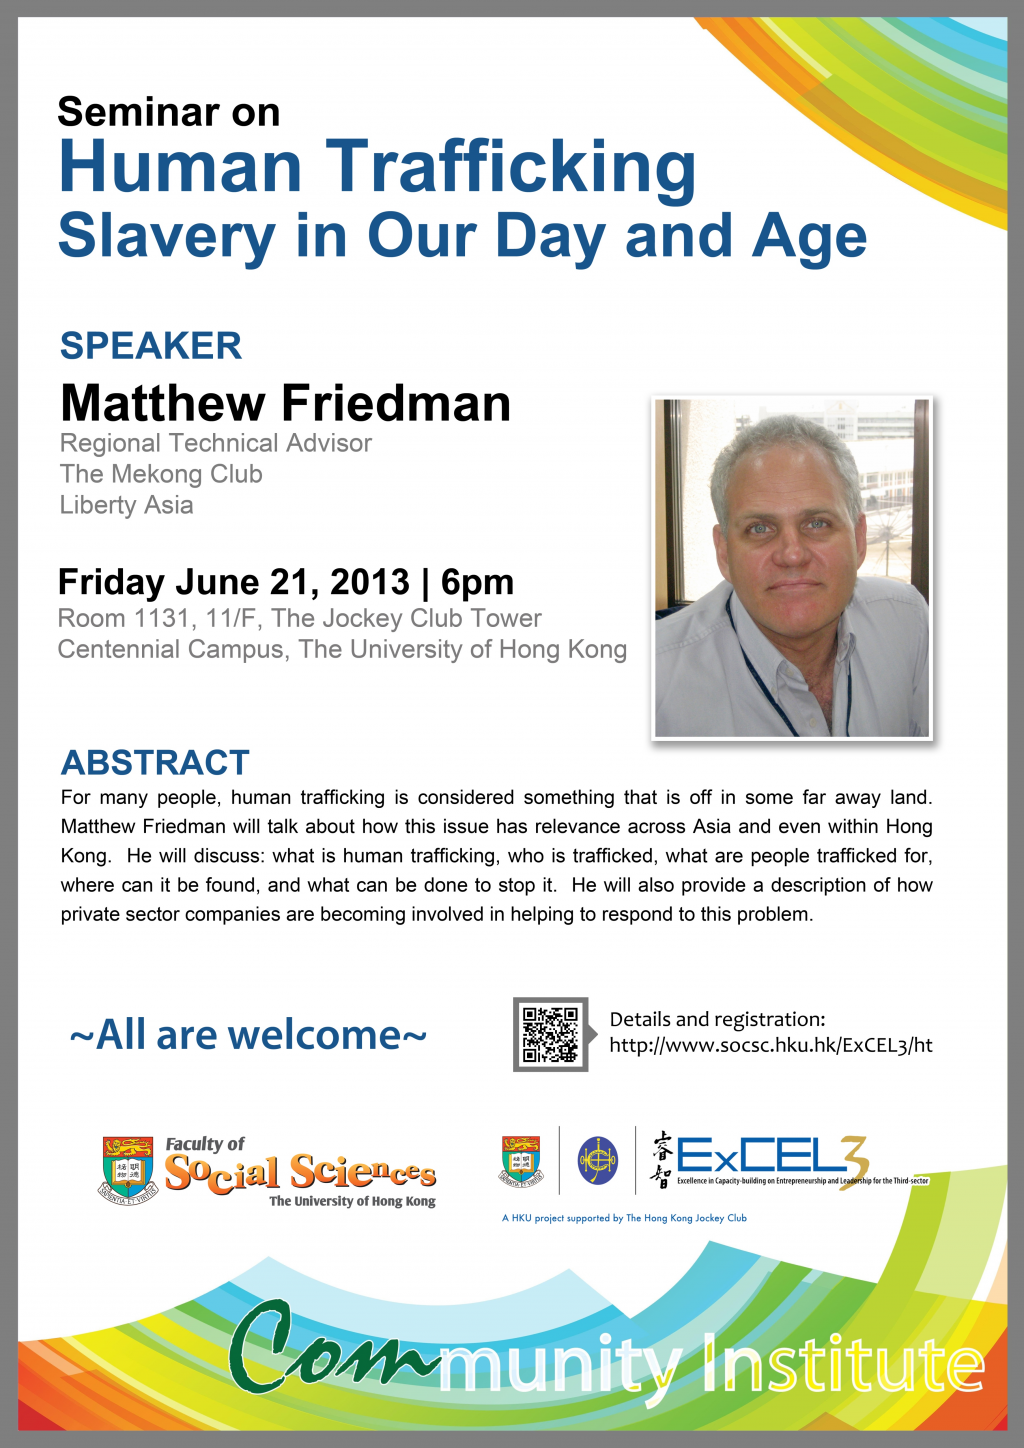 Seminar on Human Trafficking: Slavery in Our Day and Age